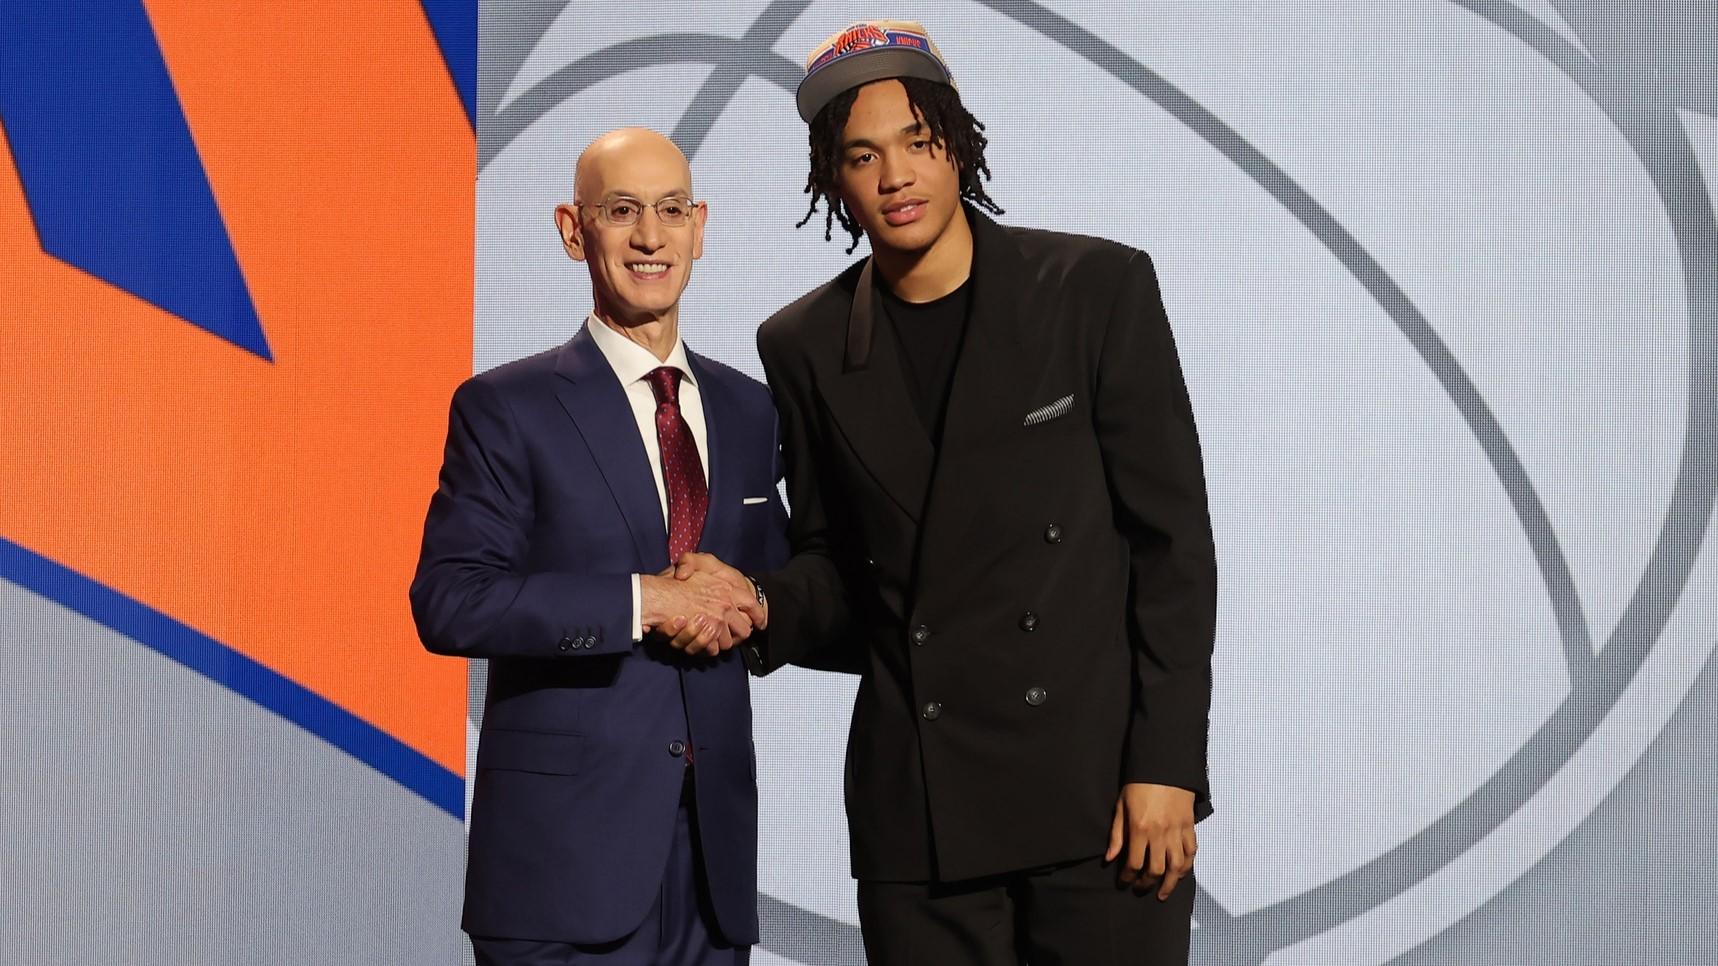 Knicks signing first-round draft pick Pacome Dadiet to 80 percent of standard contract